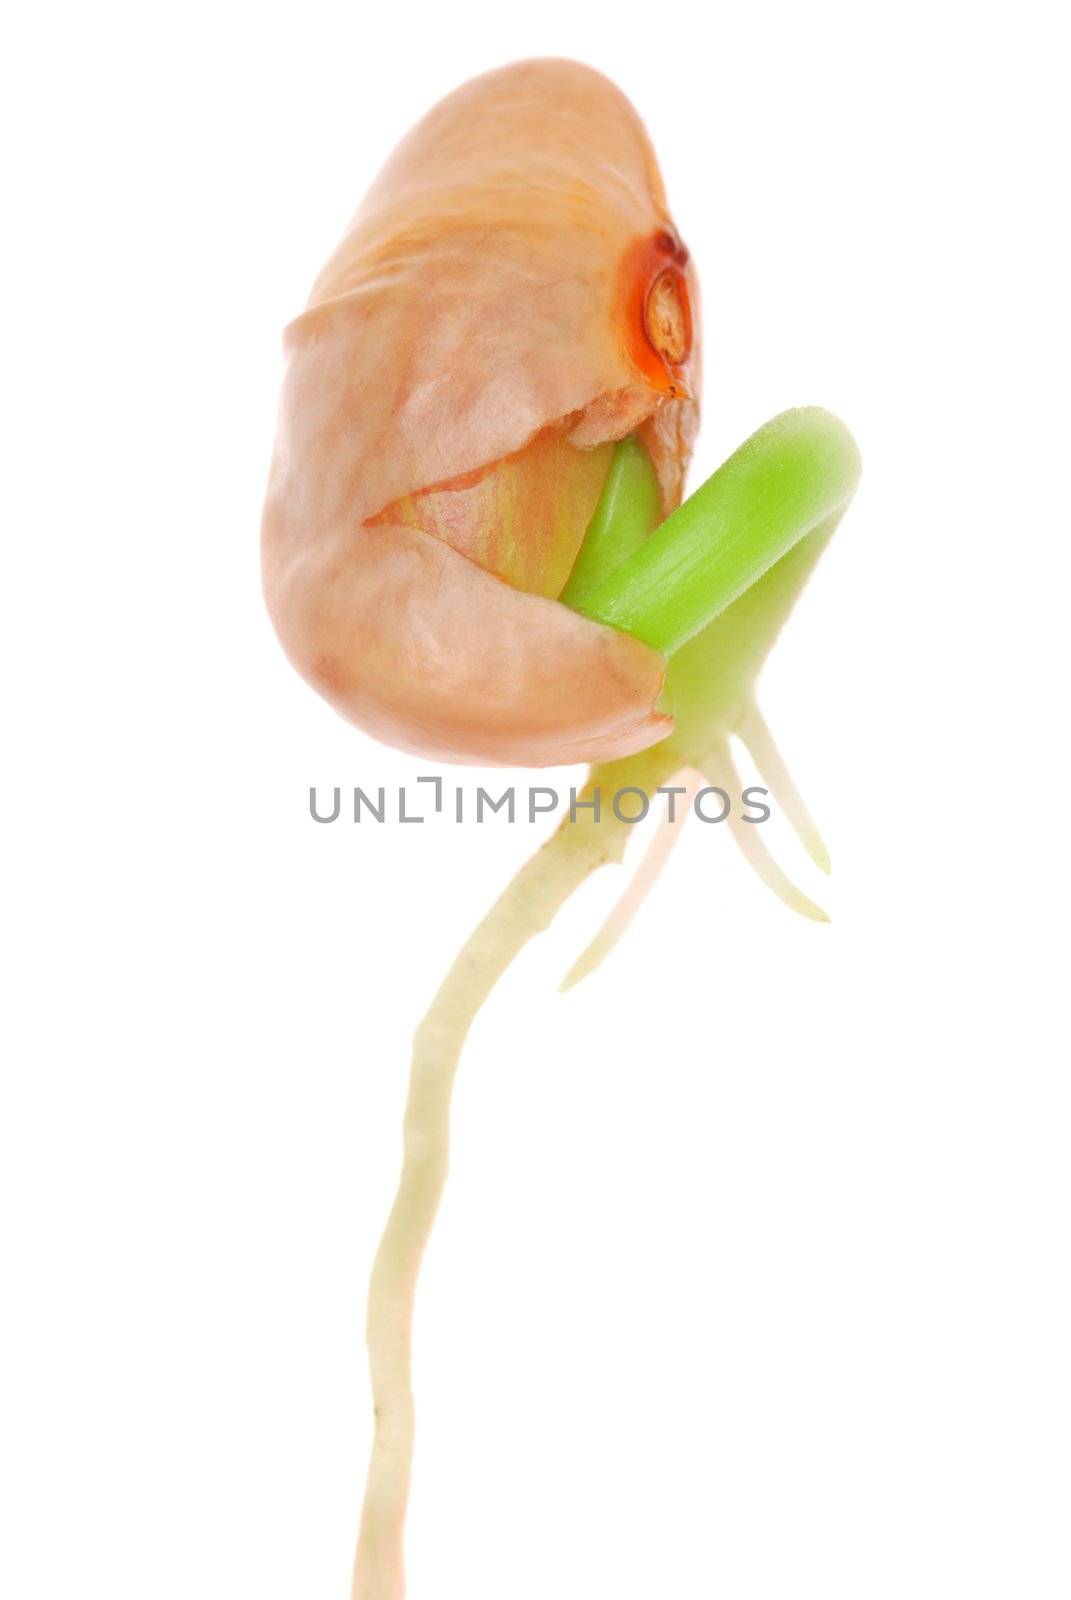 String bean sprout close-up isolated on white background